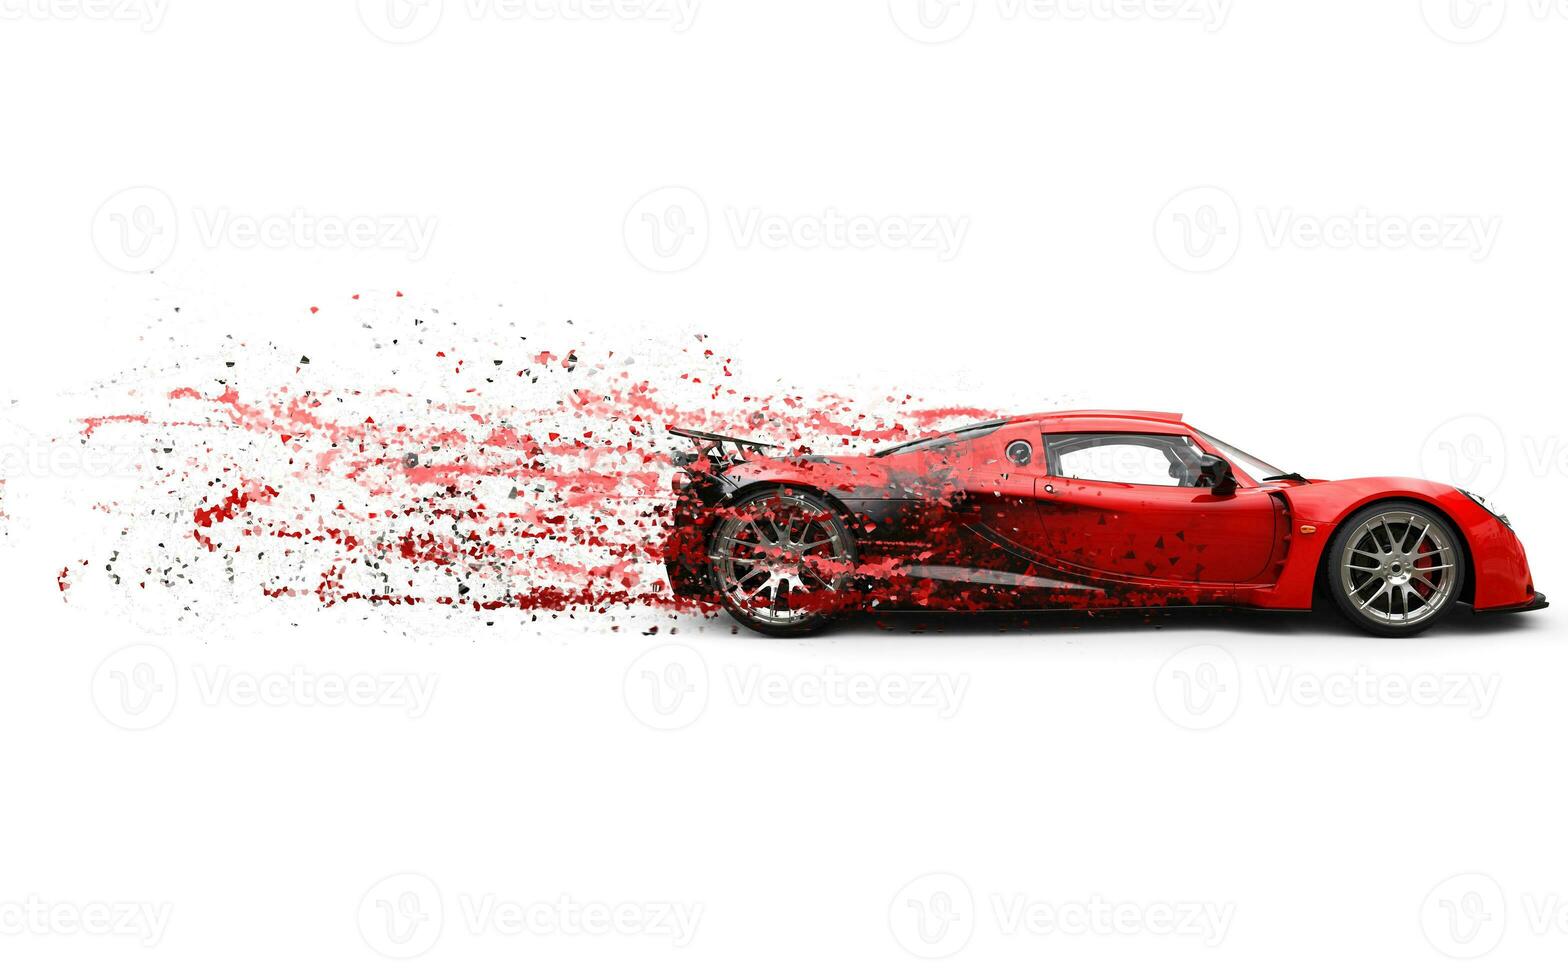 Super fast red racing car photo